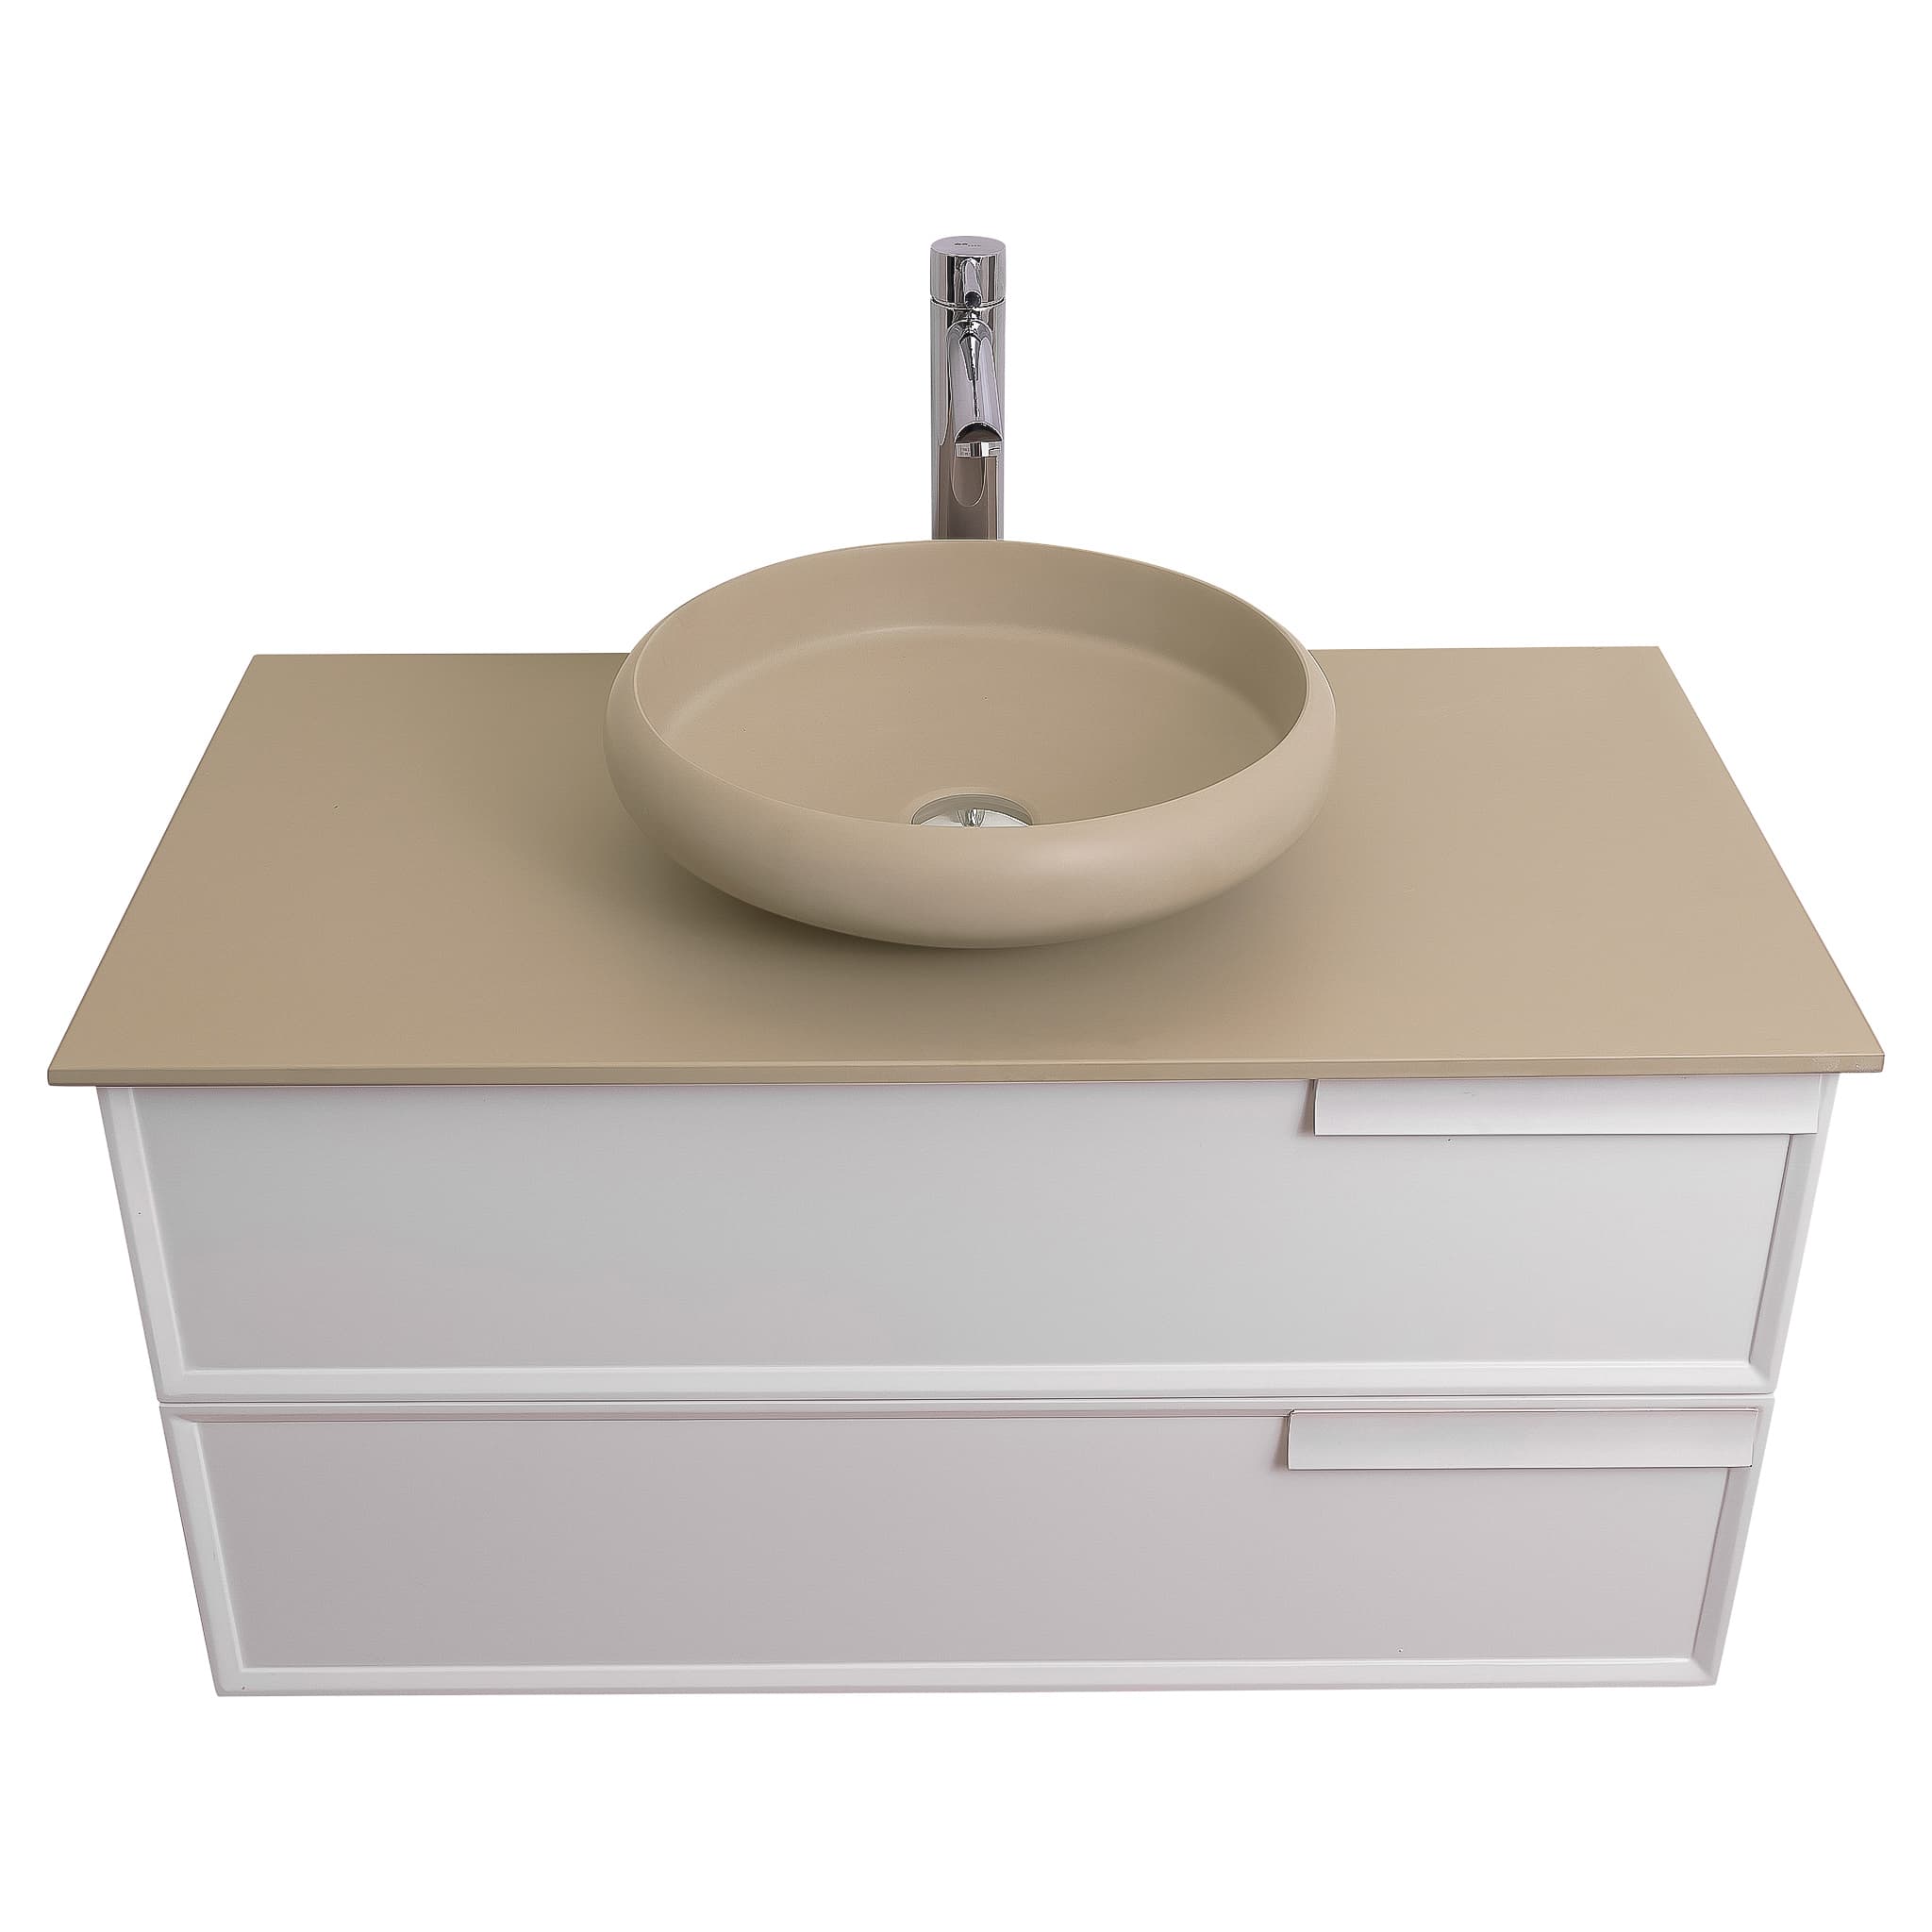 Garda 31.5 Matte White Cabinet, Solid Surface Flat Taupe Counter and Round Solid Surface Taupe Basin 1153, Wall Mounted Modern Vanity Set